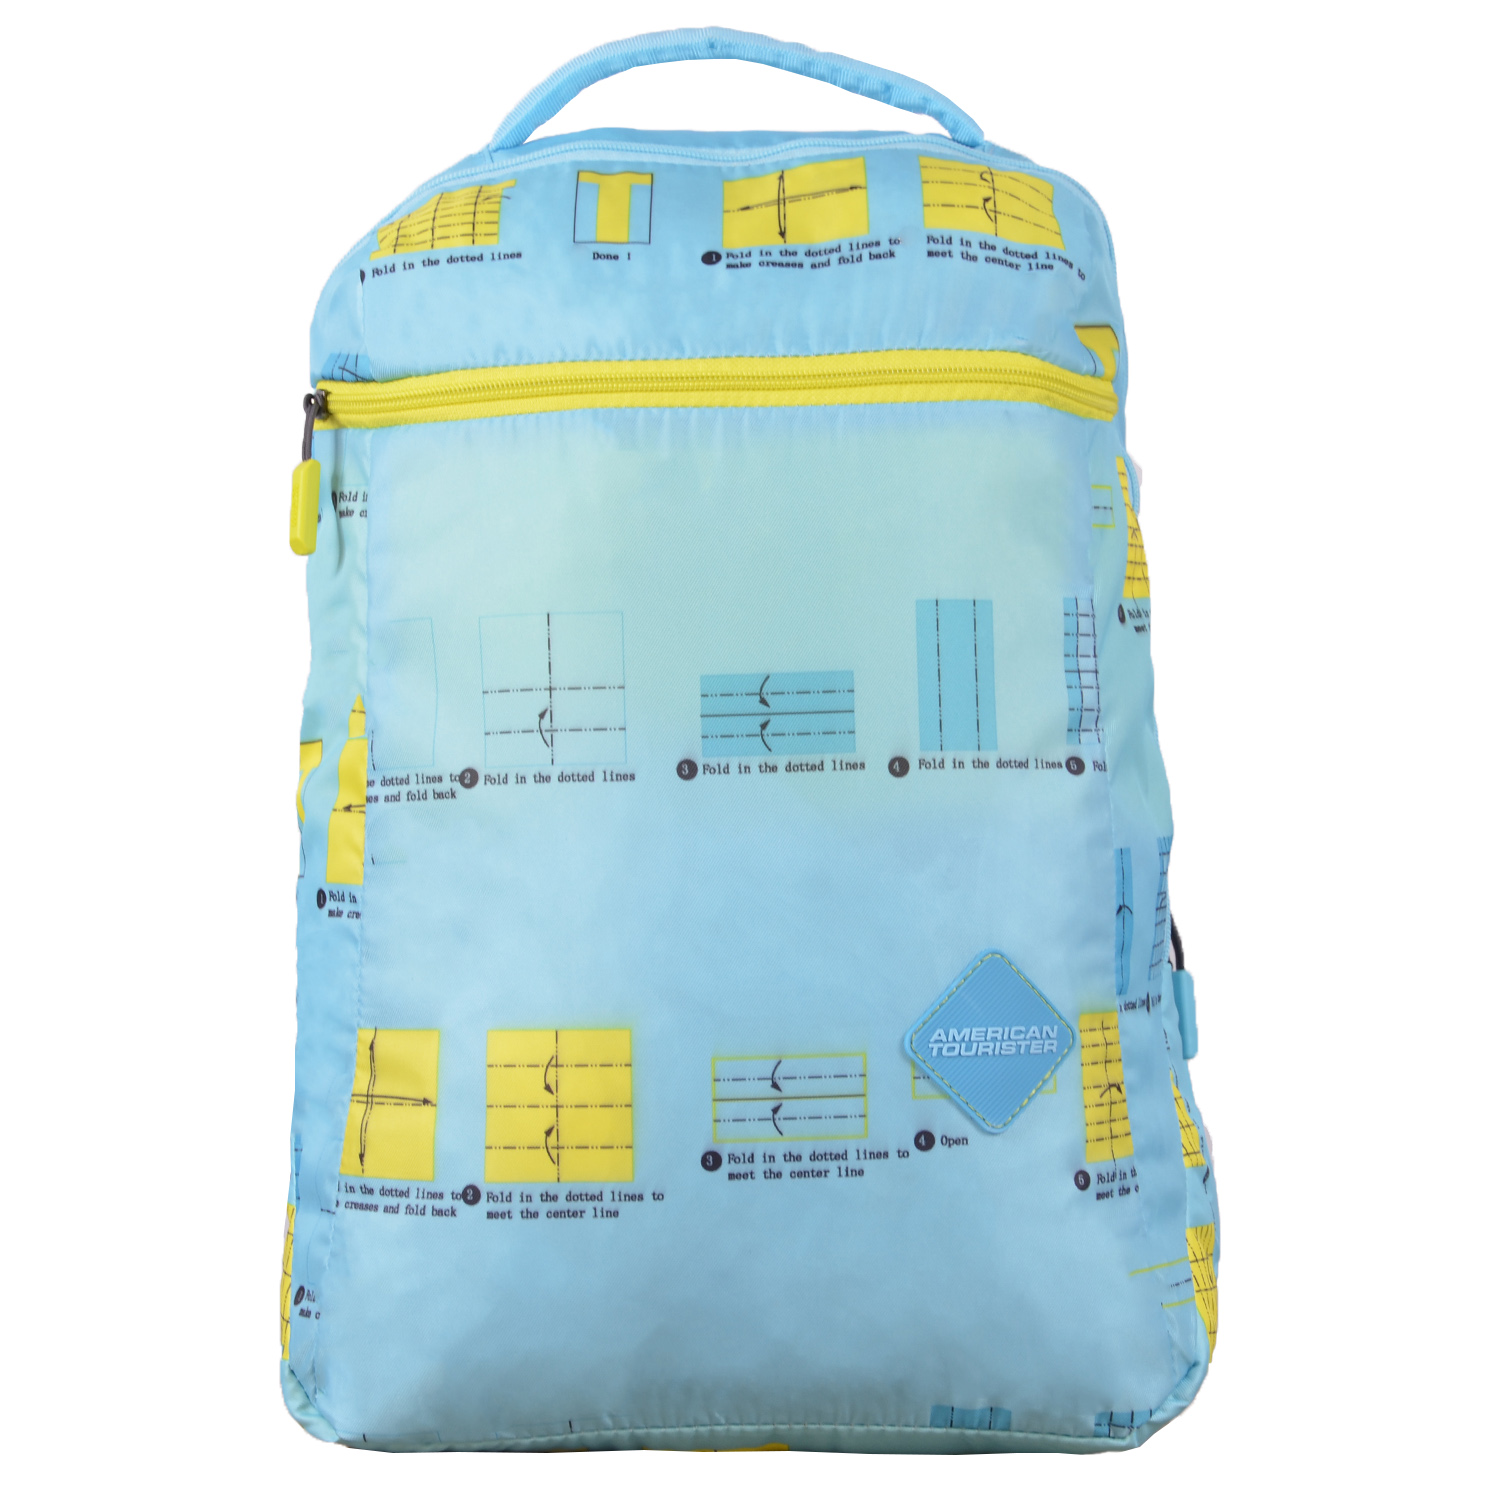 RoshanBags_AMERICAN TOURISTER 25L ALEO 01 BACKPACK TURQUOISE